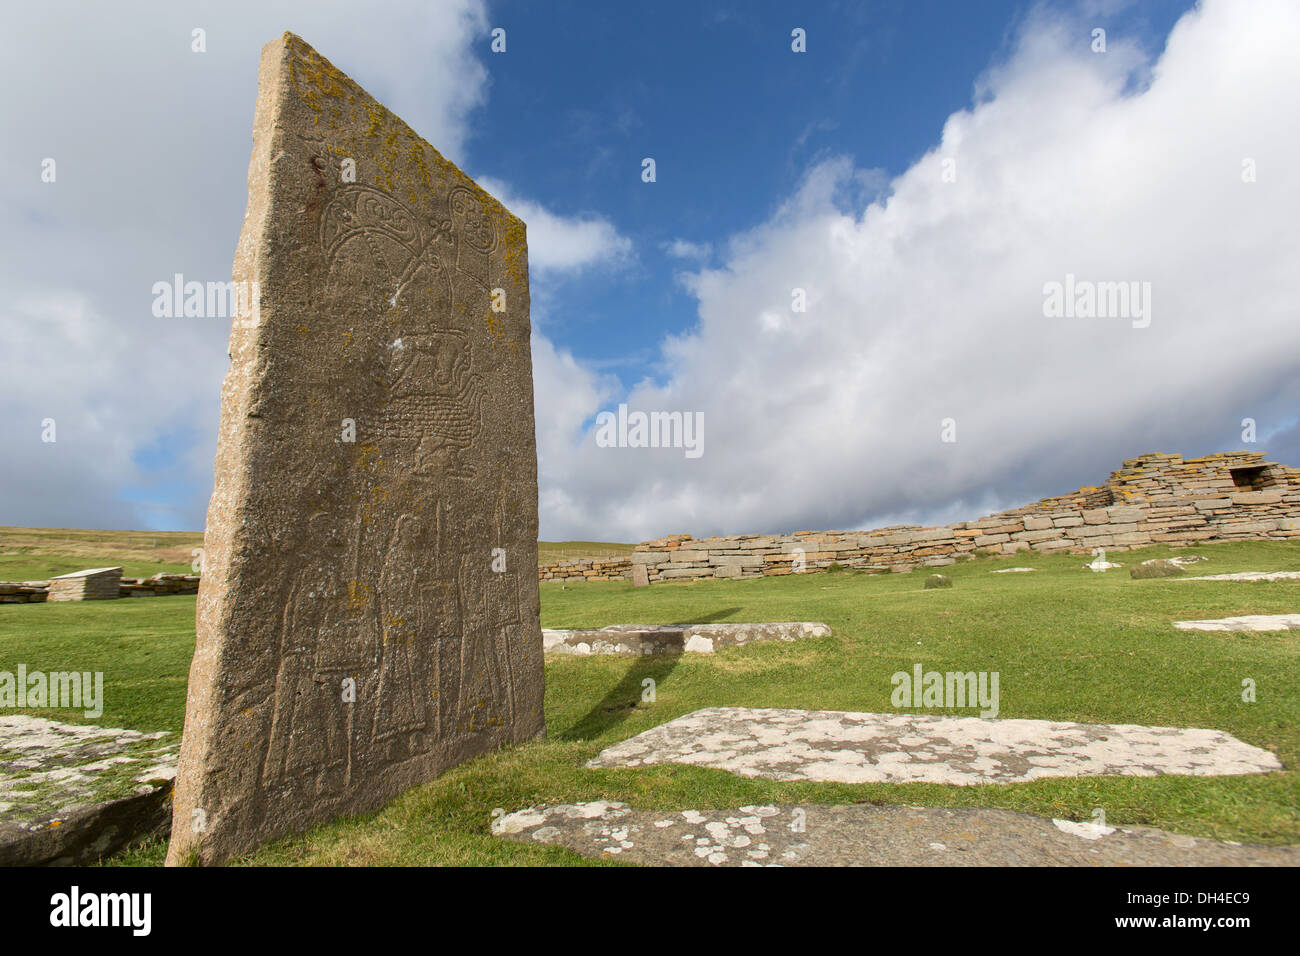 Islands of Orkney, Scotland. A replica of a 7th century Pictish stone at the Burgh of Birsay historic settlement. Stock Photo